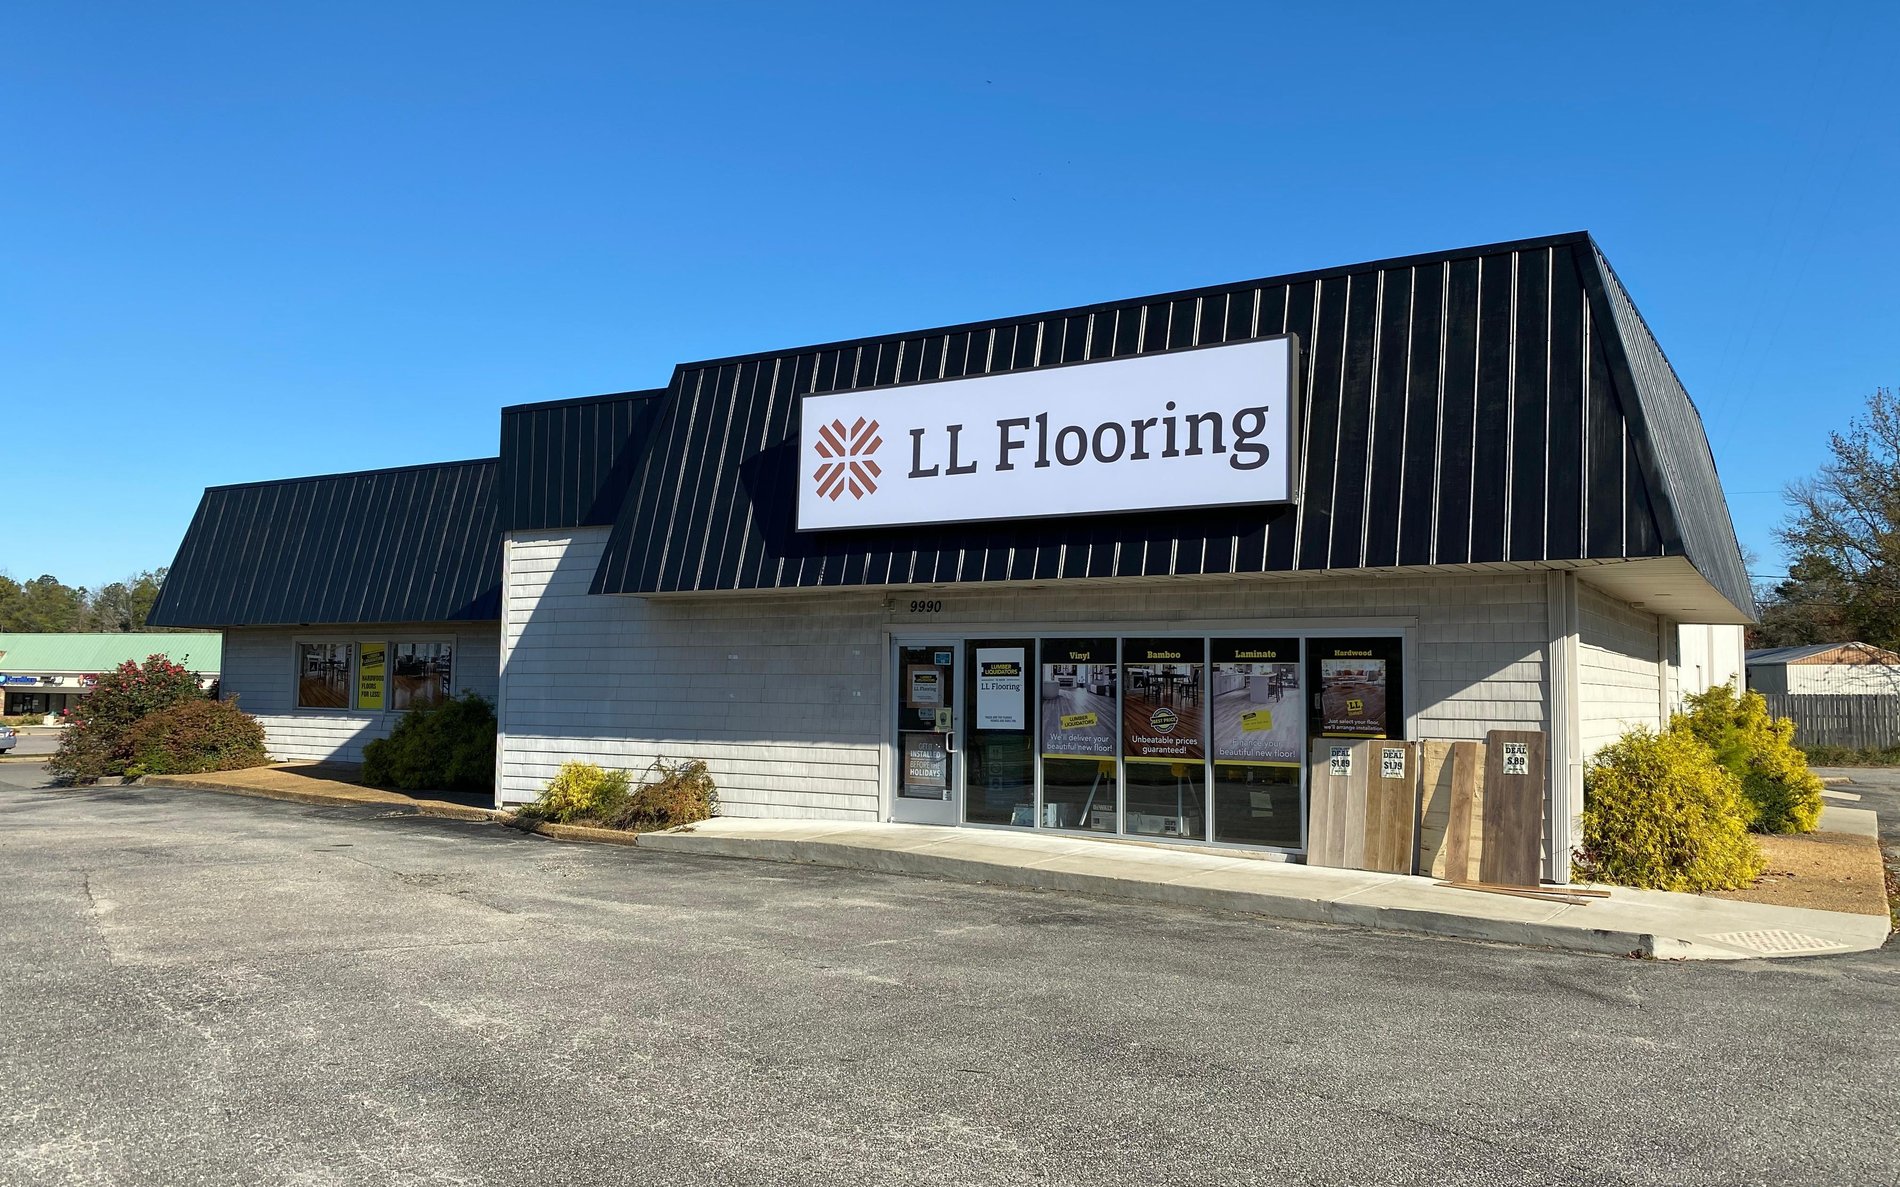 LL Flooring #1274 North Chesterfield | 9990 Robious Road | Storefront